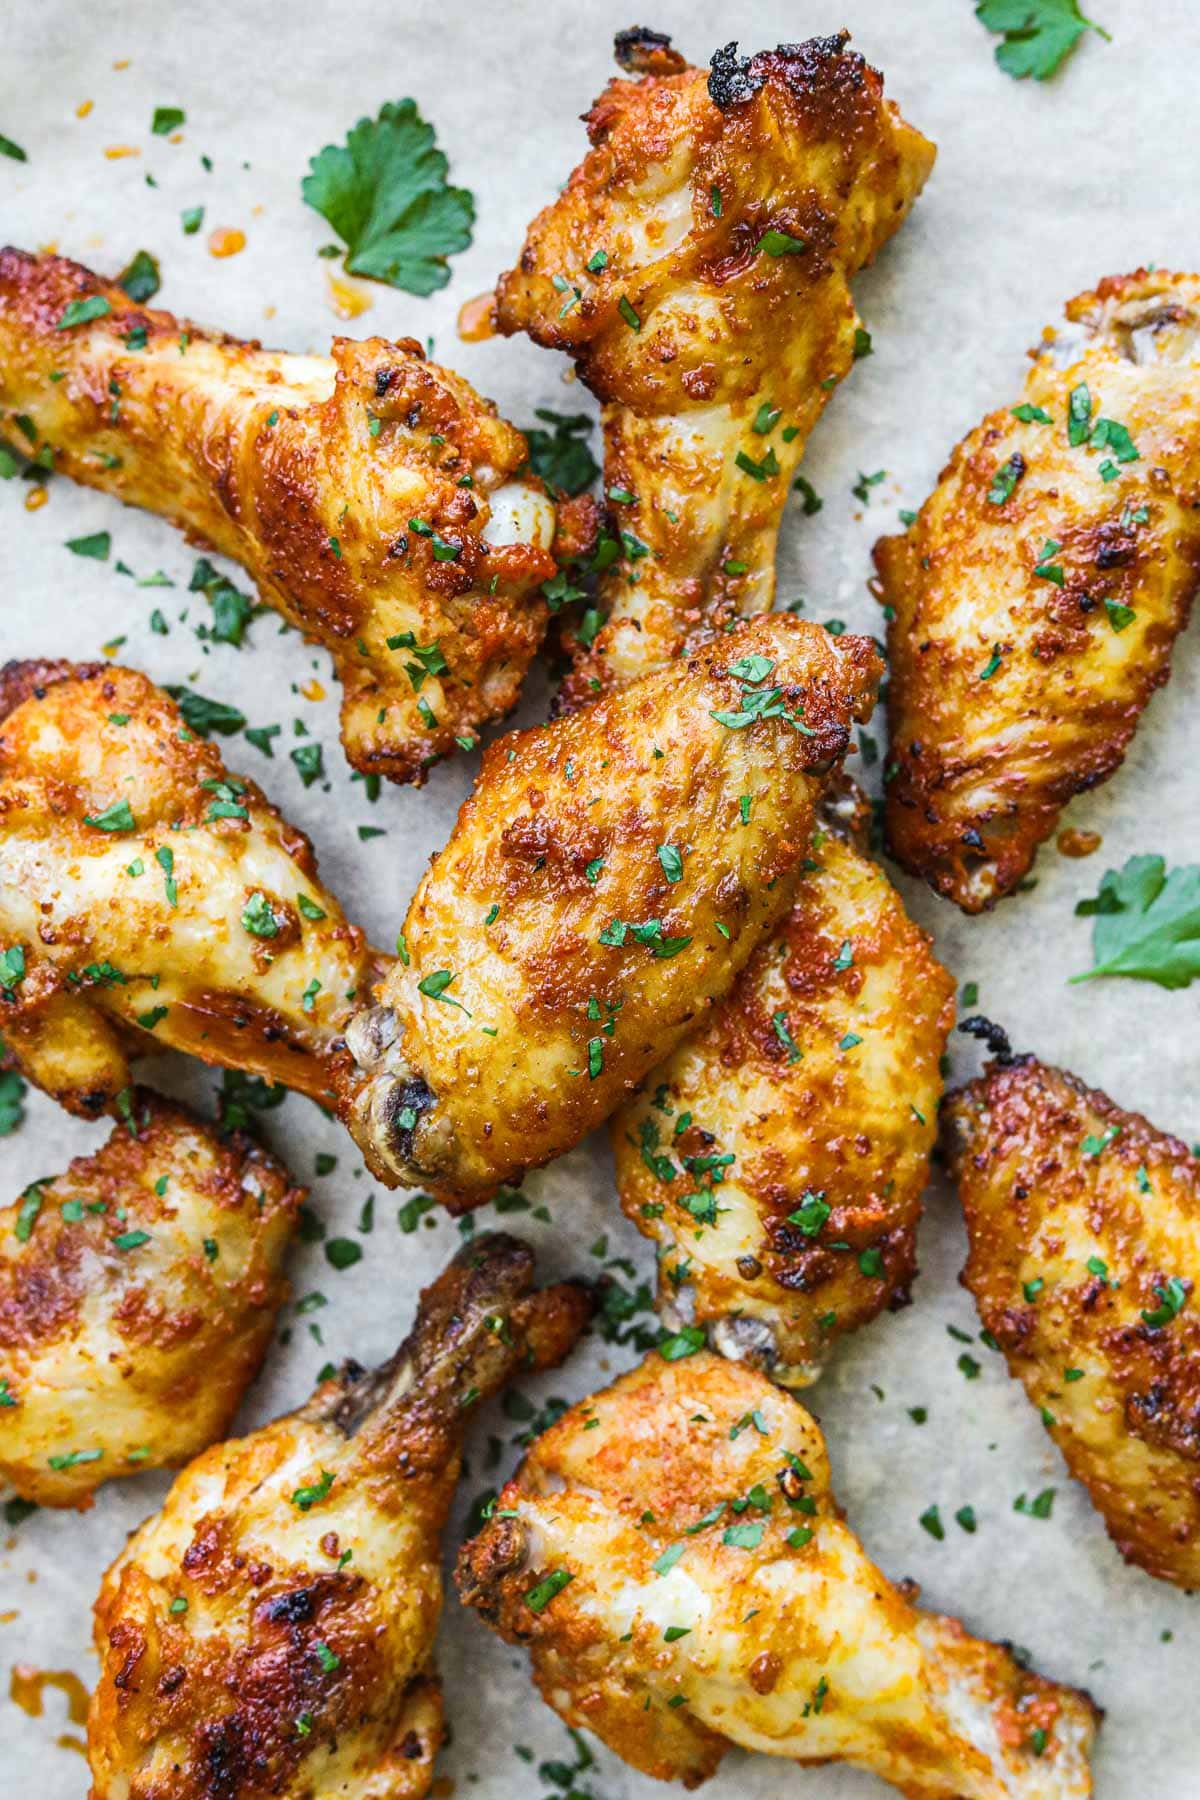 Crispy oven-baked or oven-broiled chicken wings with golden crispy skin topped with fresh chopped Italian parsley.